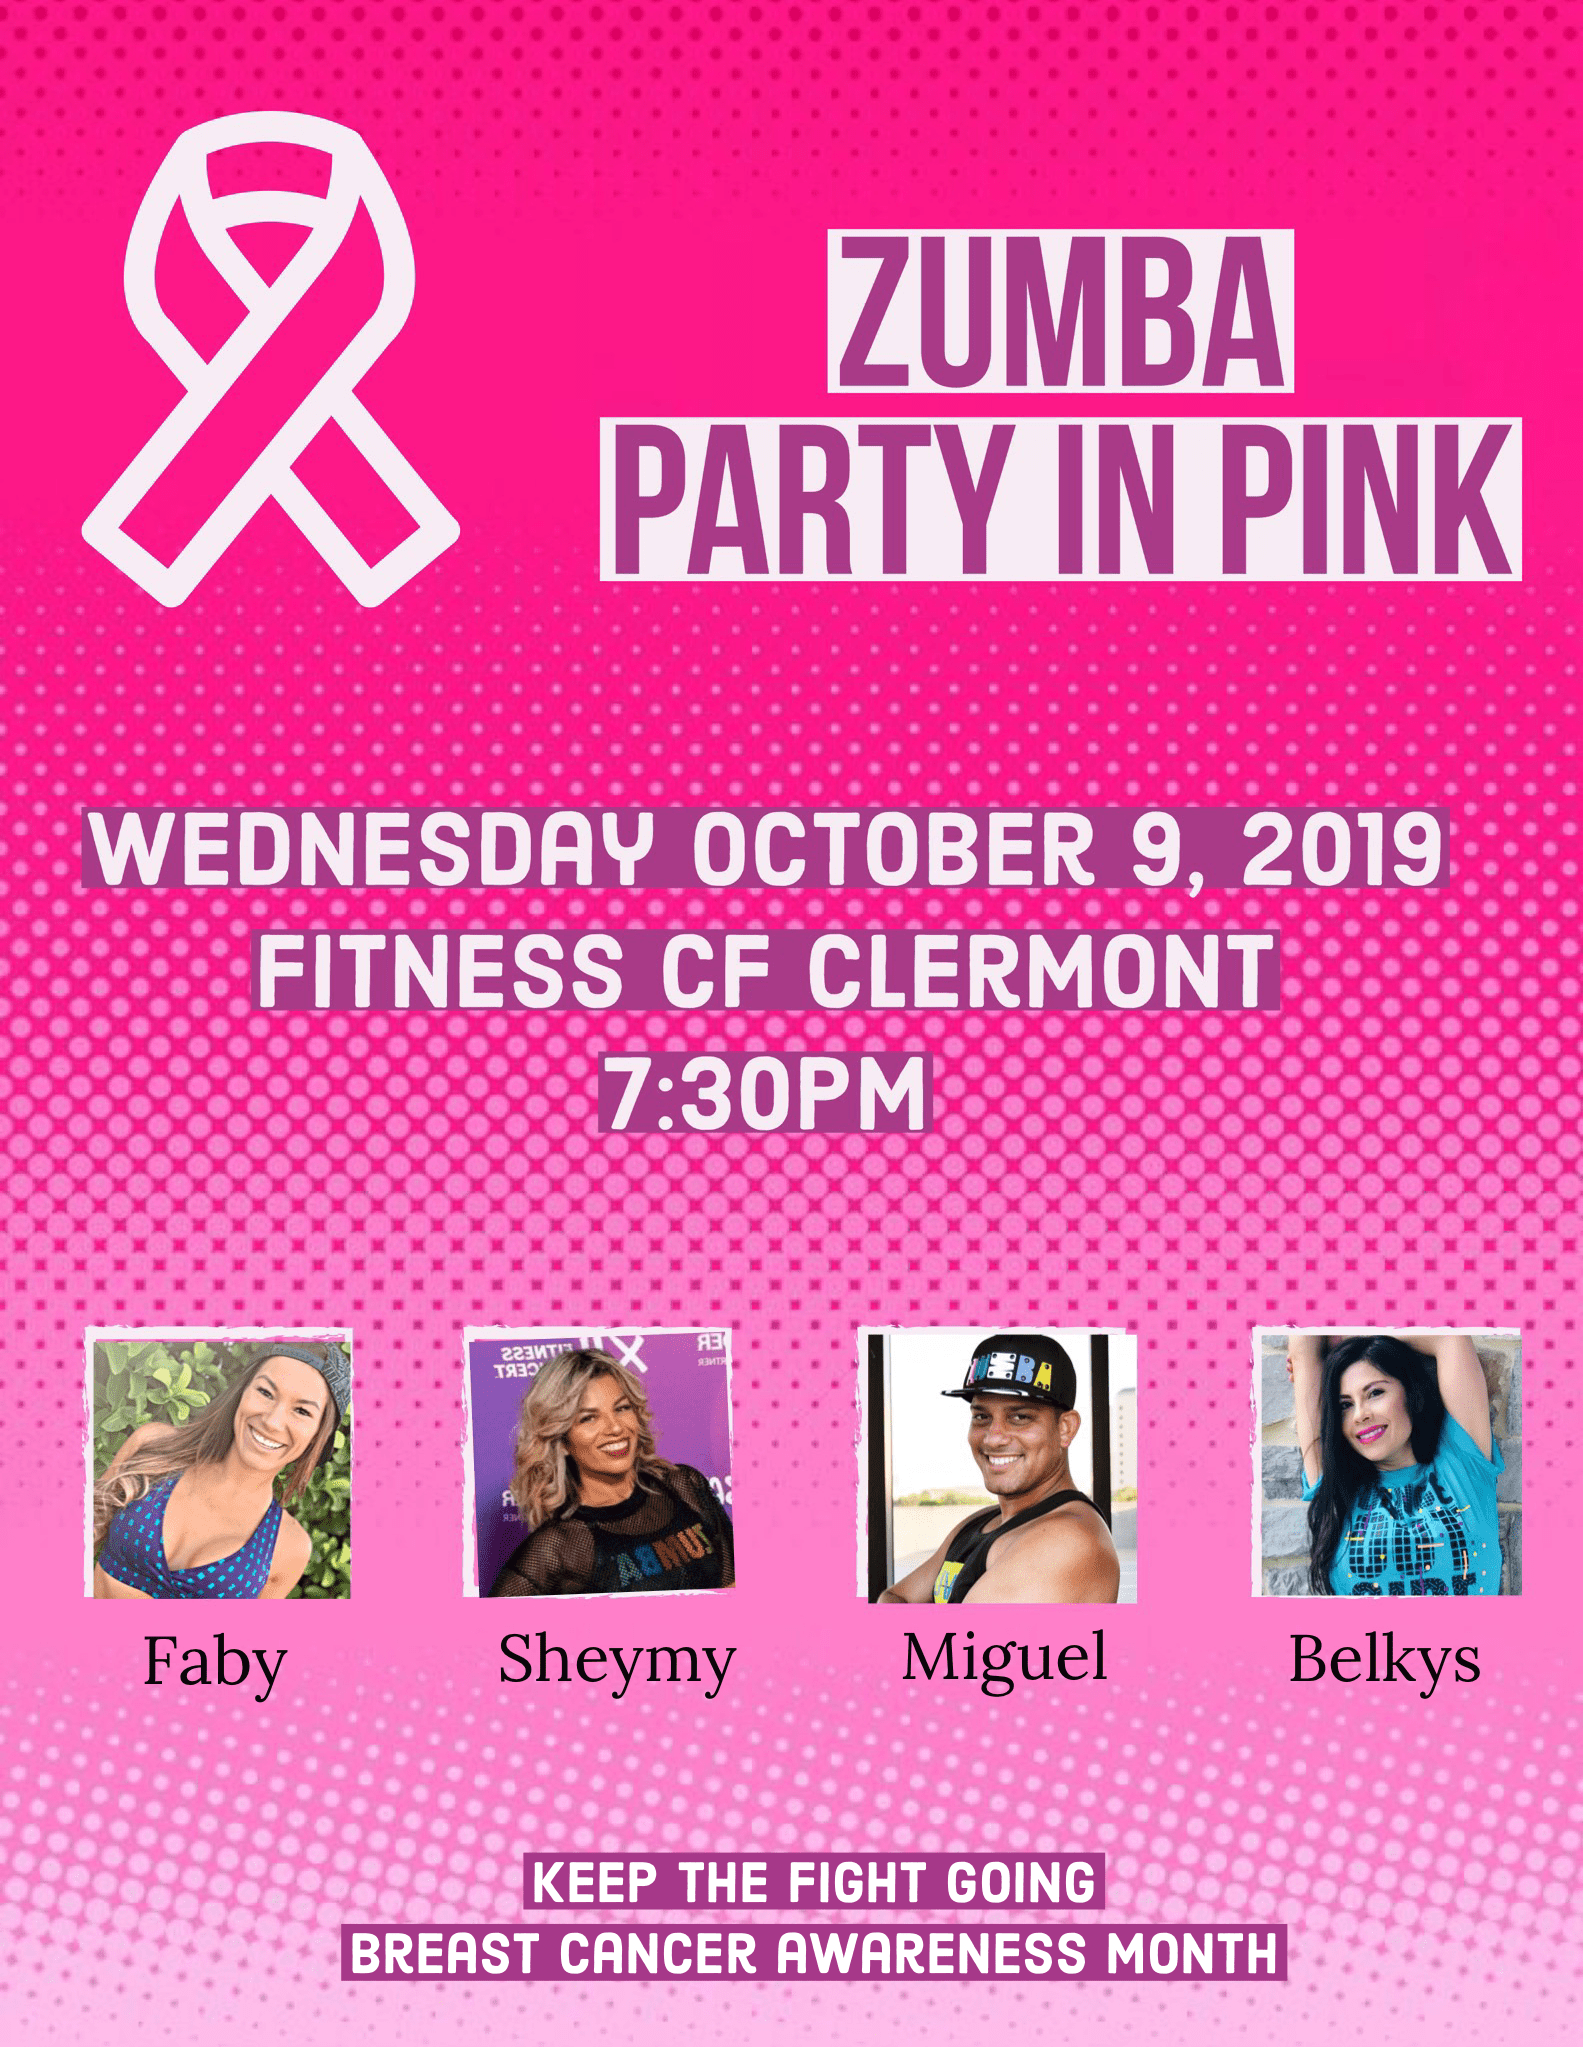 Party in Pink with Zumba!